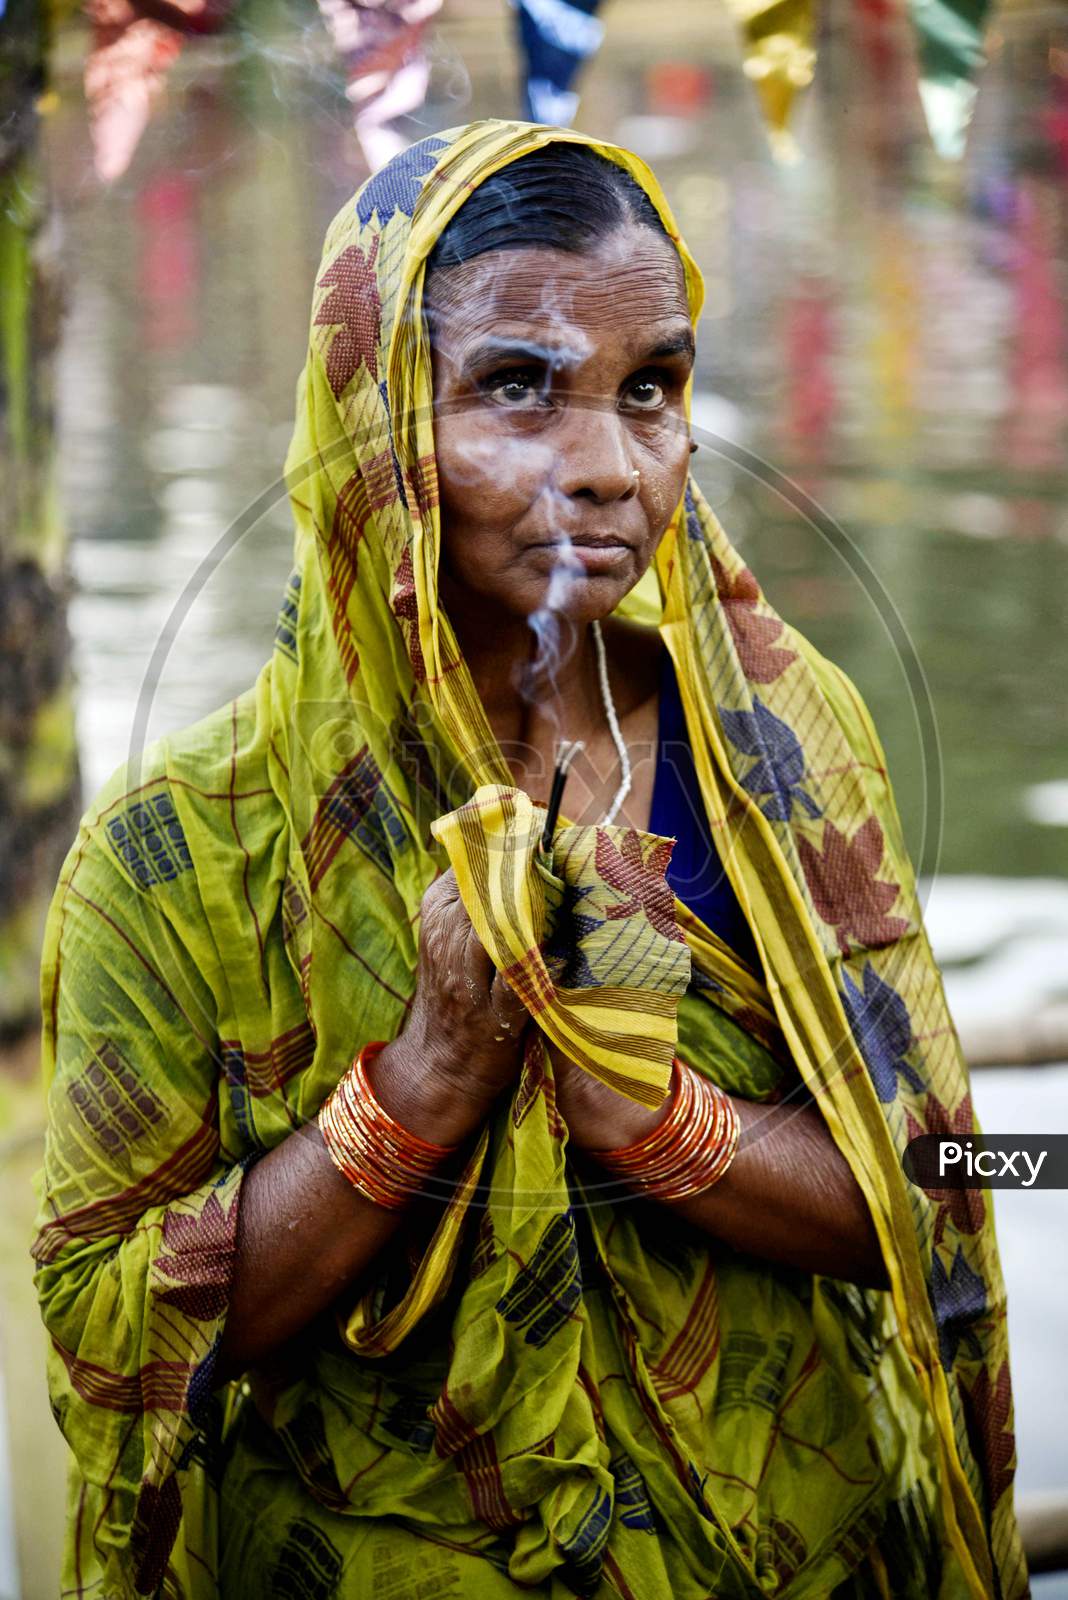 Hindu Devotees Offer Prayers During The Chhath Puja Festival At Barpeta Road Town In Barpeta District Of Assam In India,